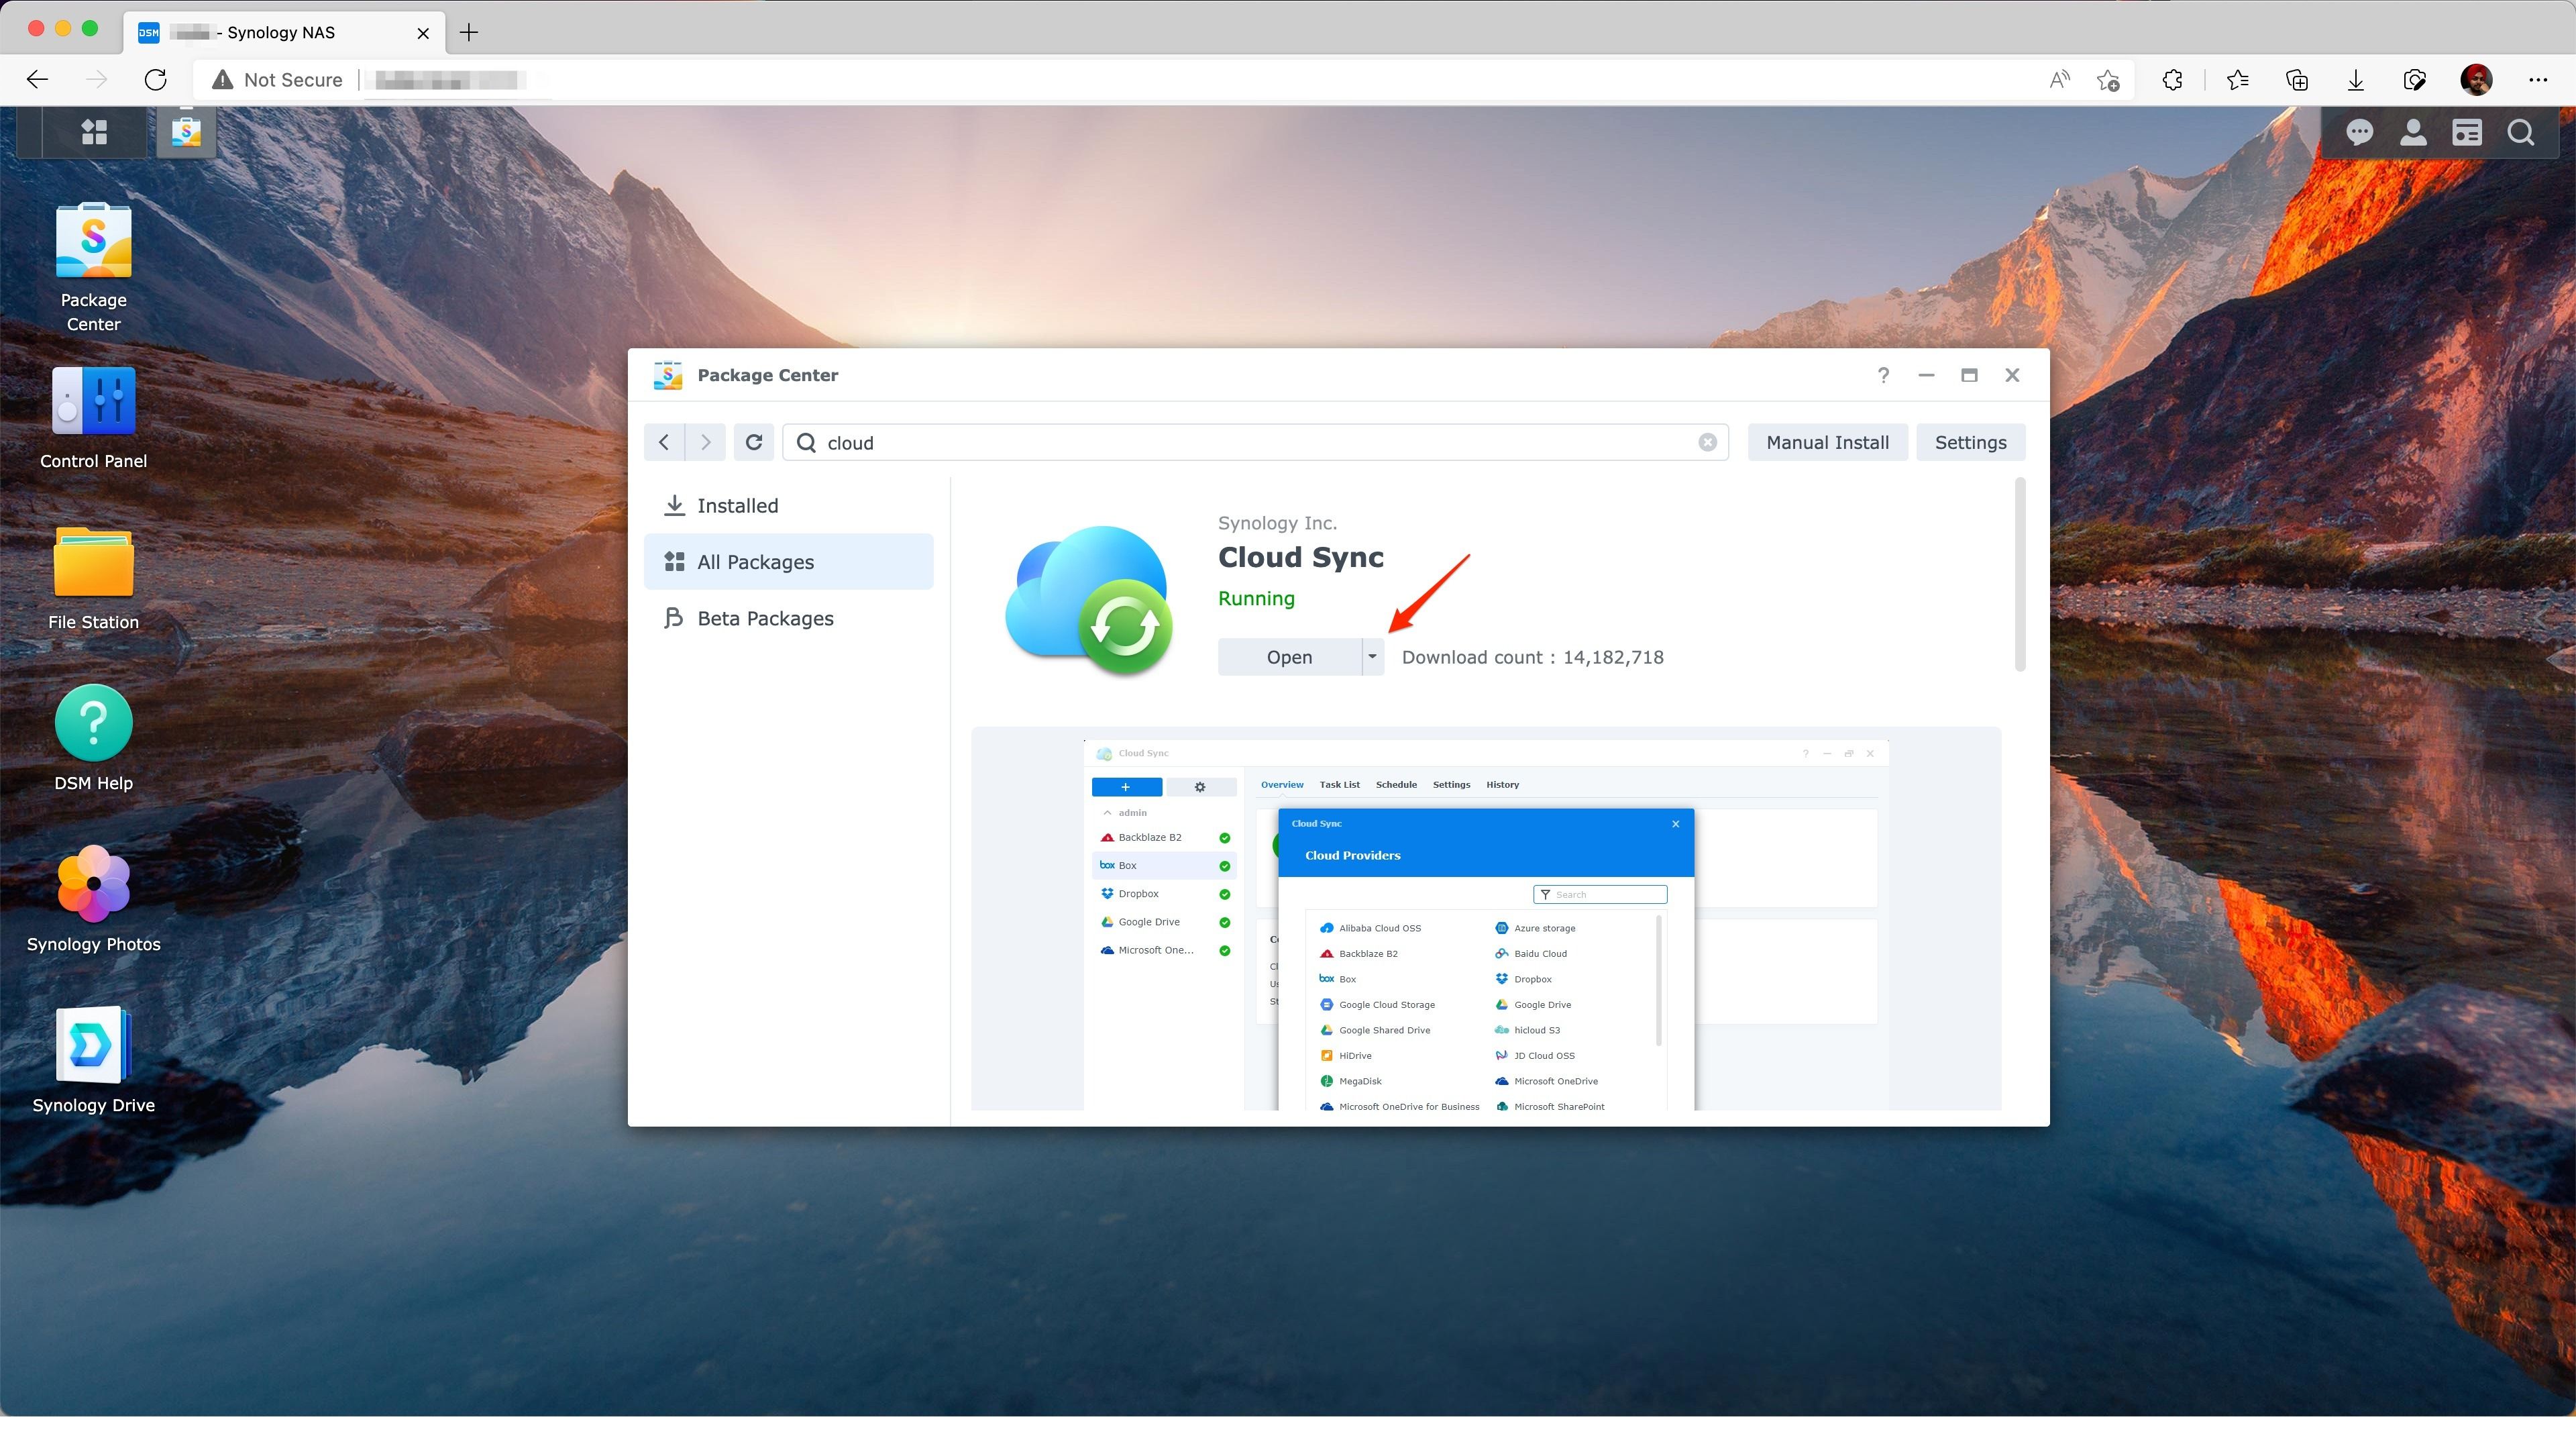 Installing Cloud Sync app on Synology NAS from Package Center